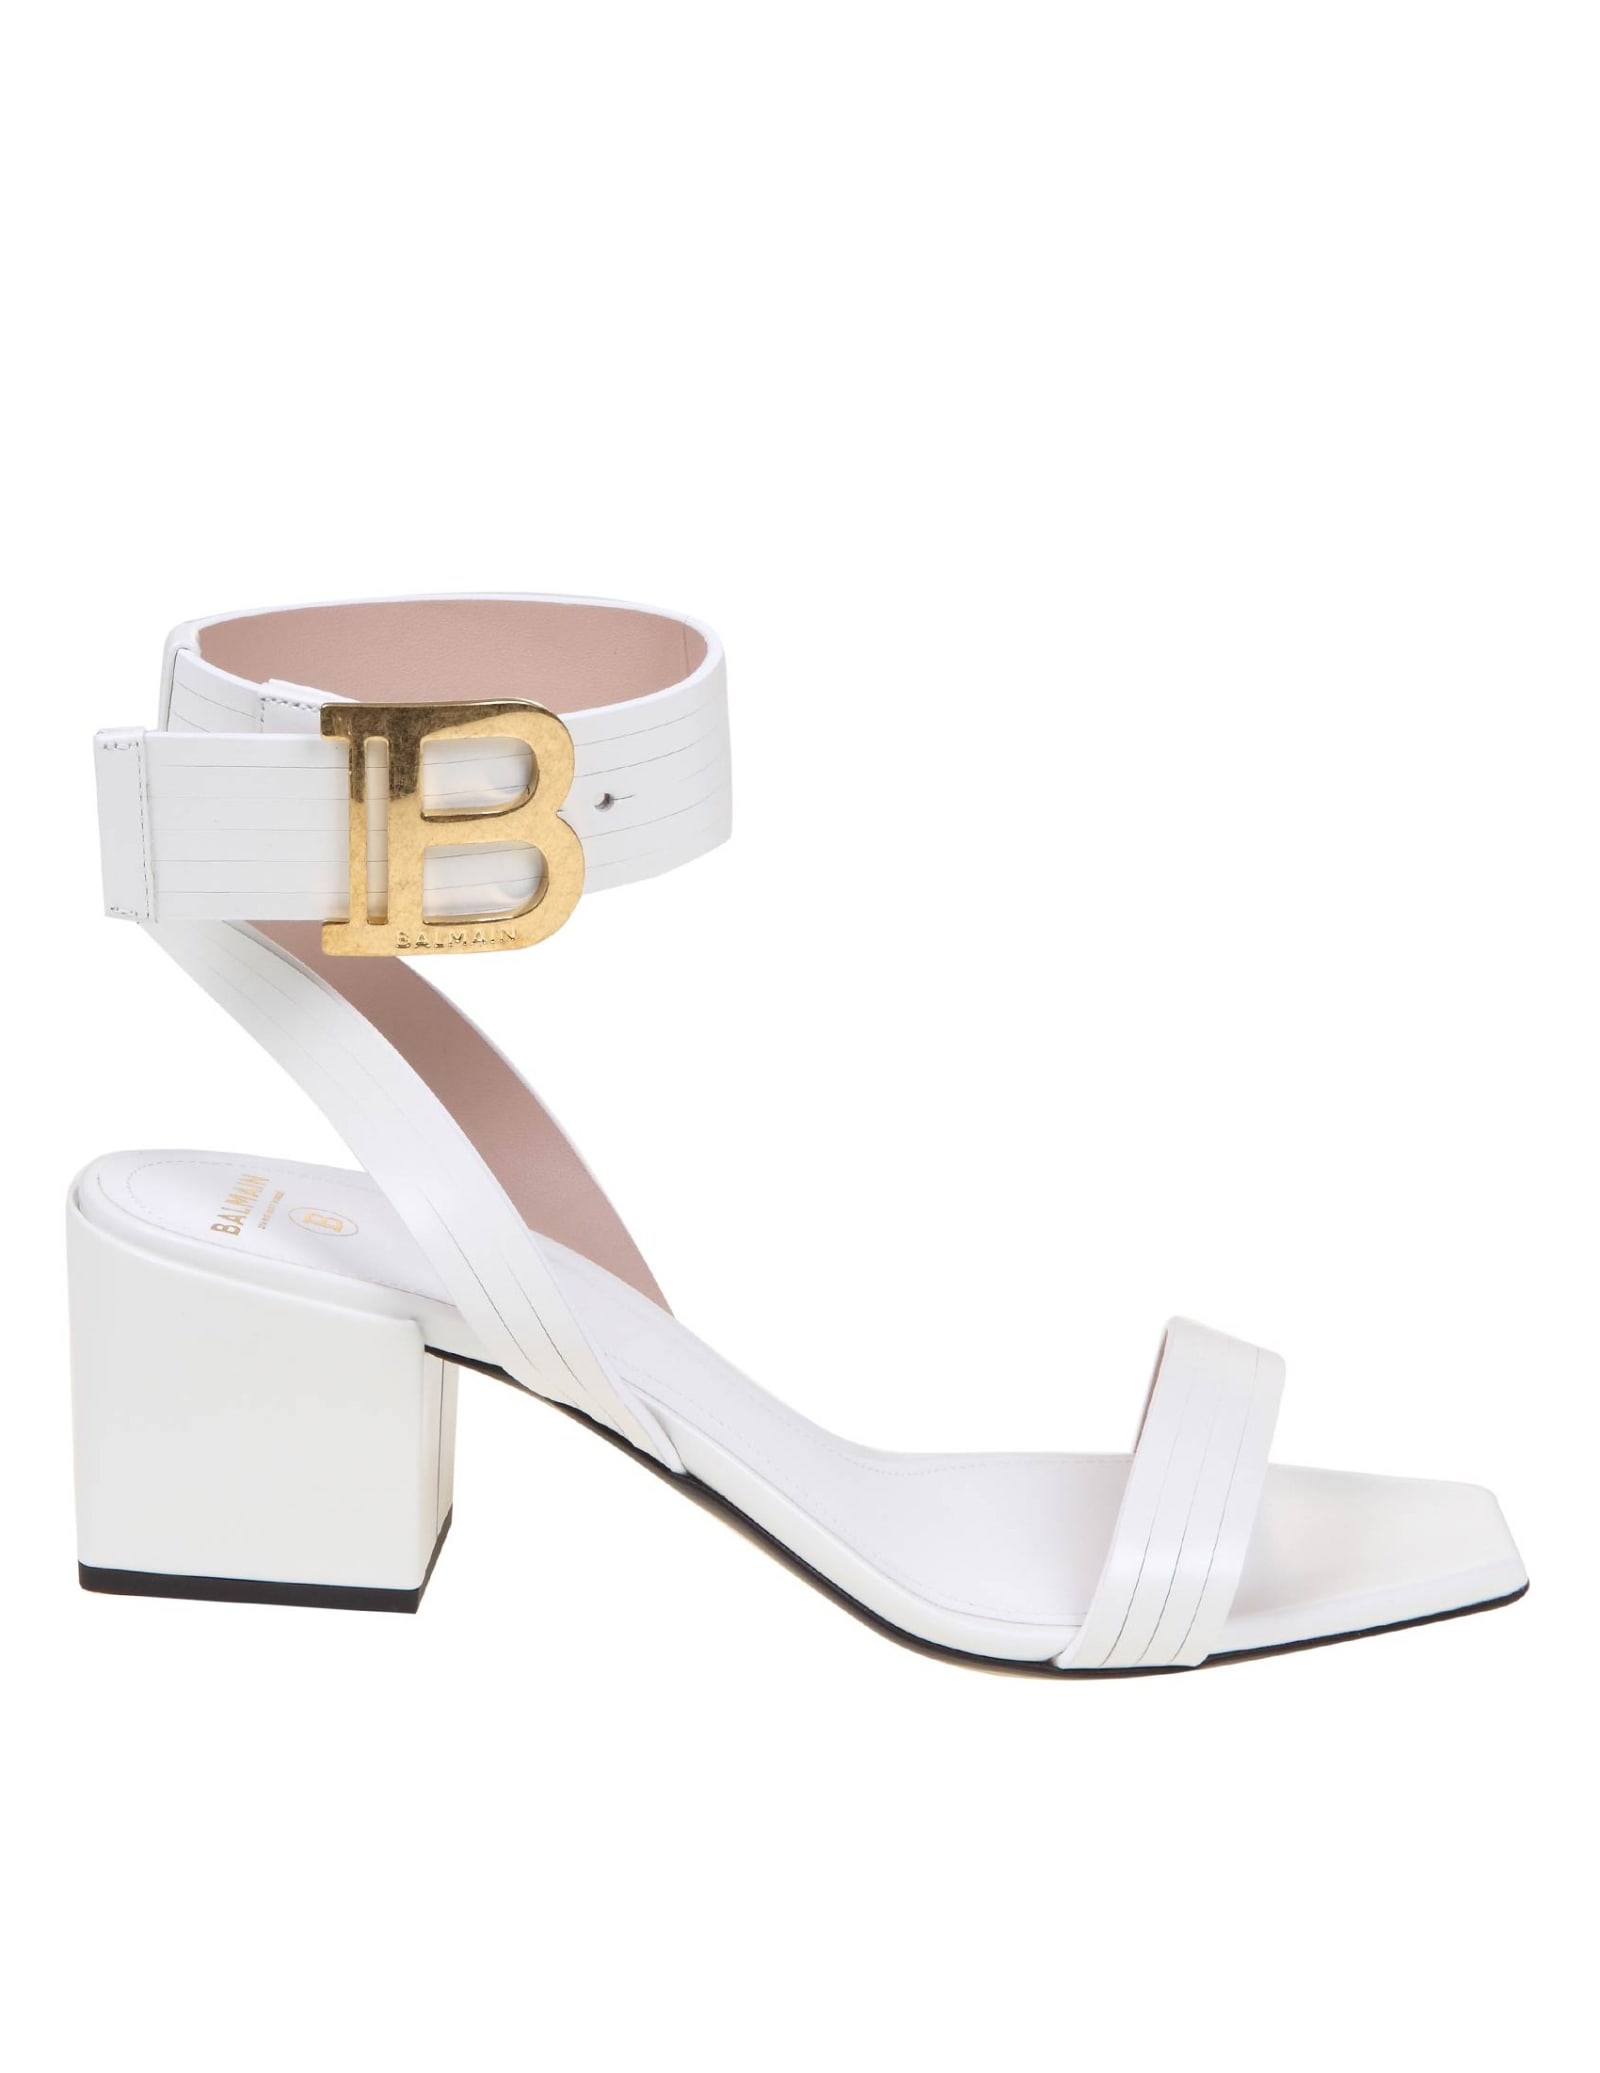 Buy Balmain Leather Sandal With Logo online, shop Balmain shoes with free shipping